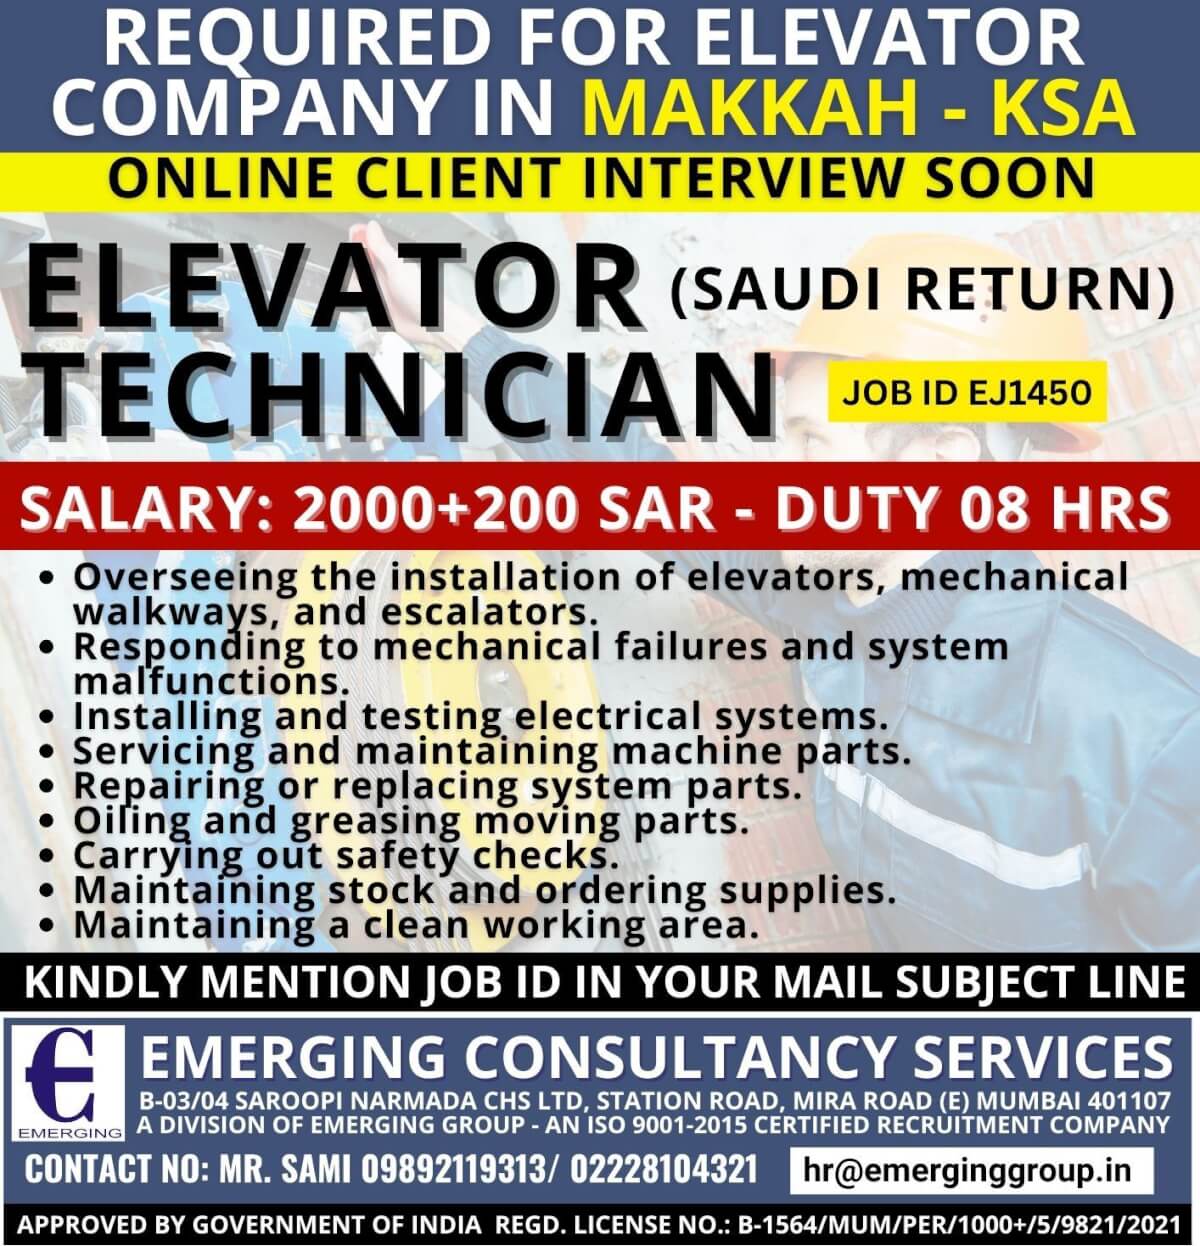 URGENTLY REQUIRED ELEVATOR COMPANY IN MAKKAH - KSA - INTERVIEW SOON - APPLY NOW